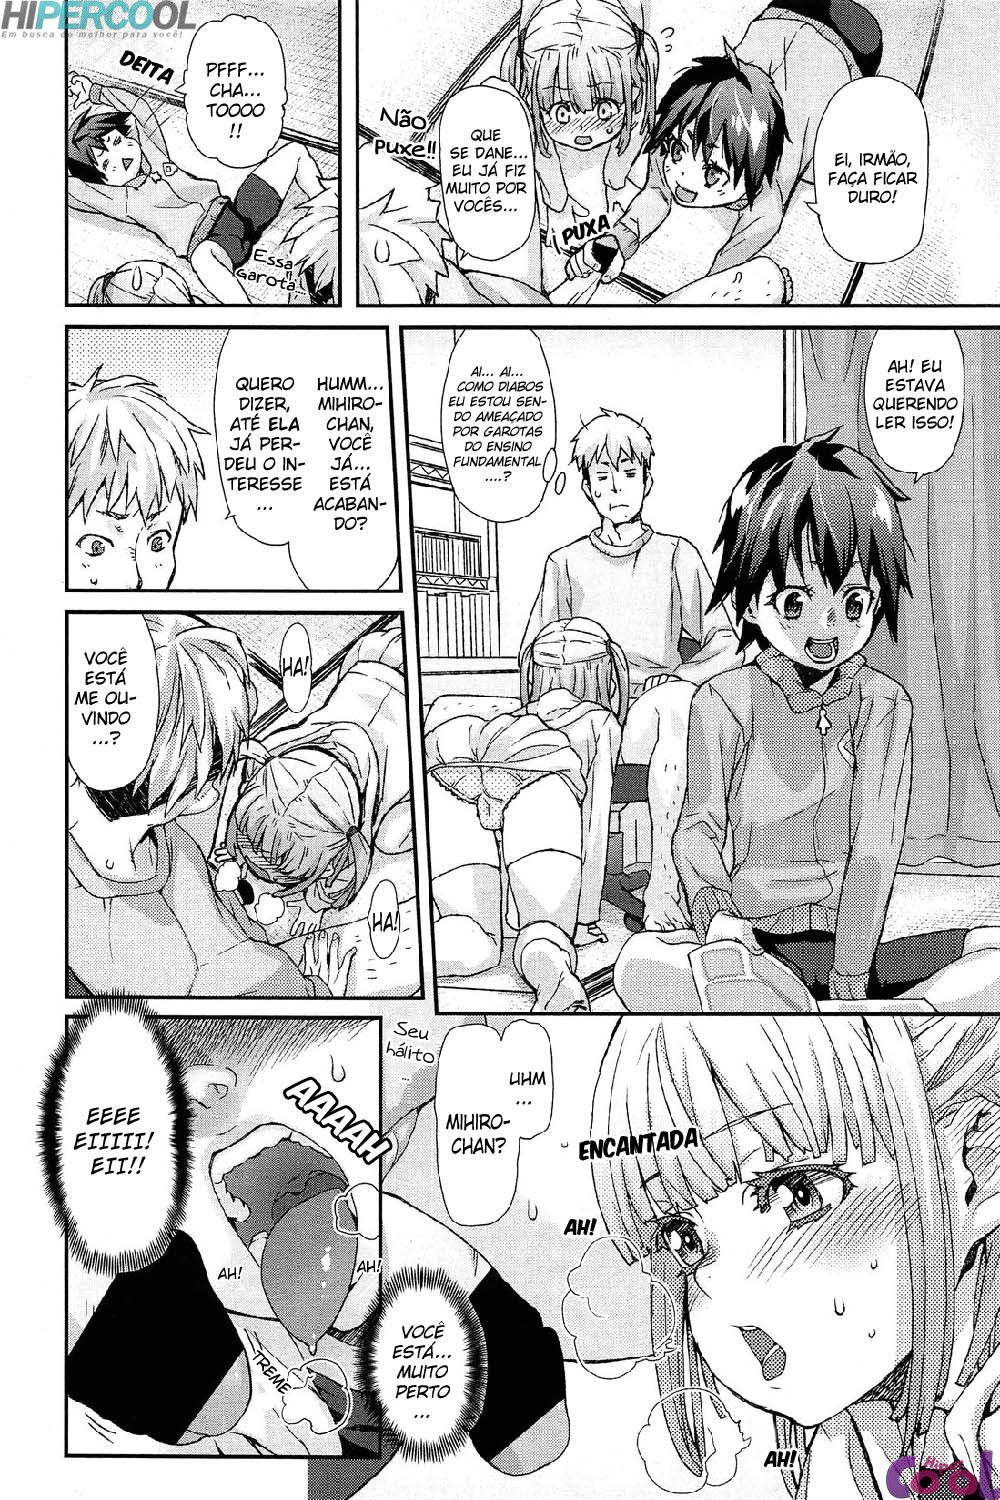 special-size--chapter-01-page-04.jpg